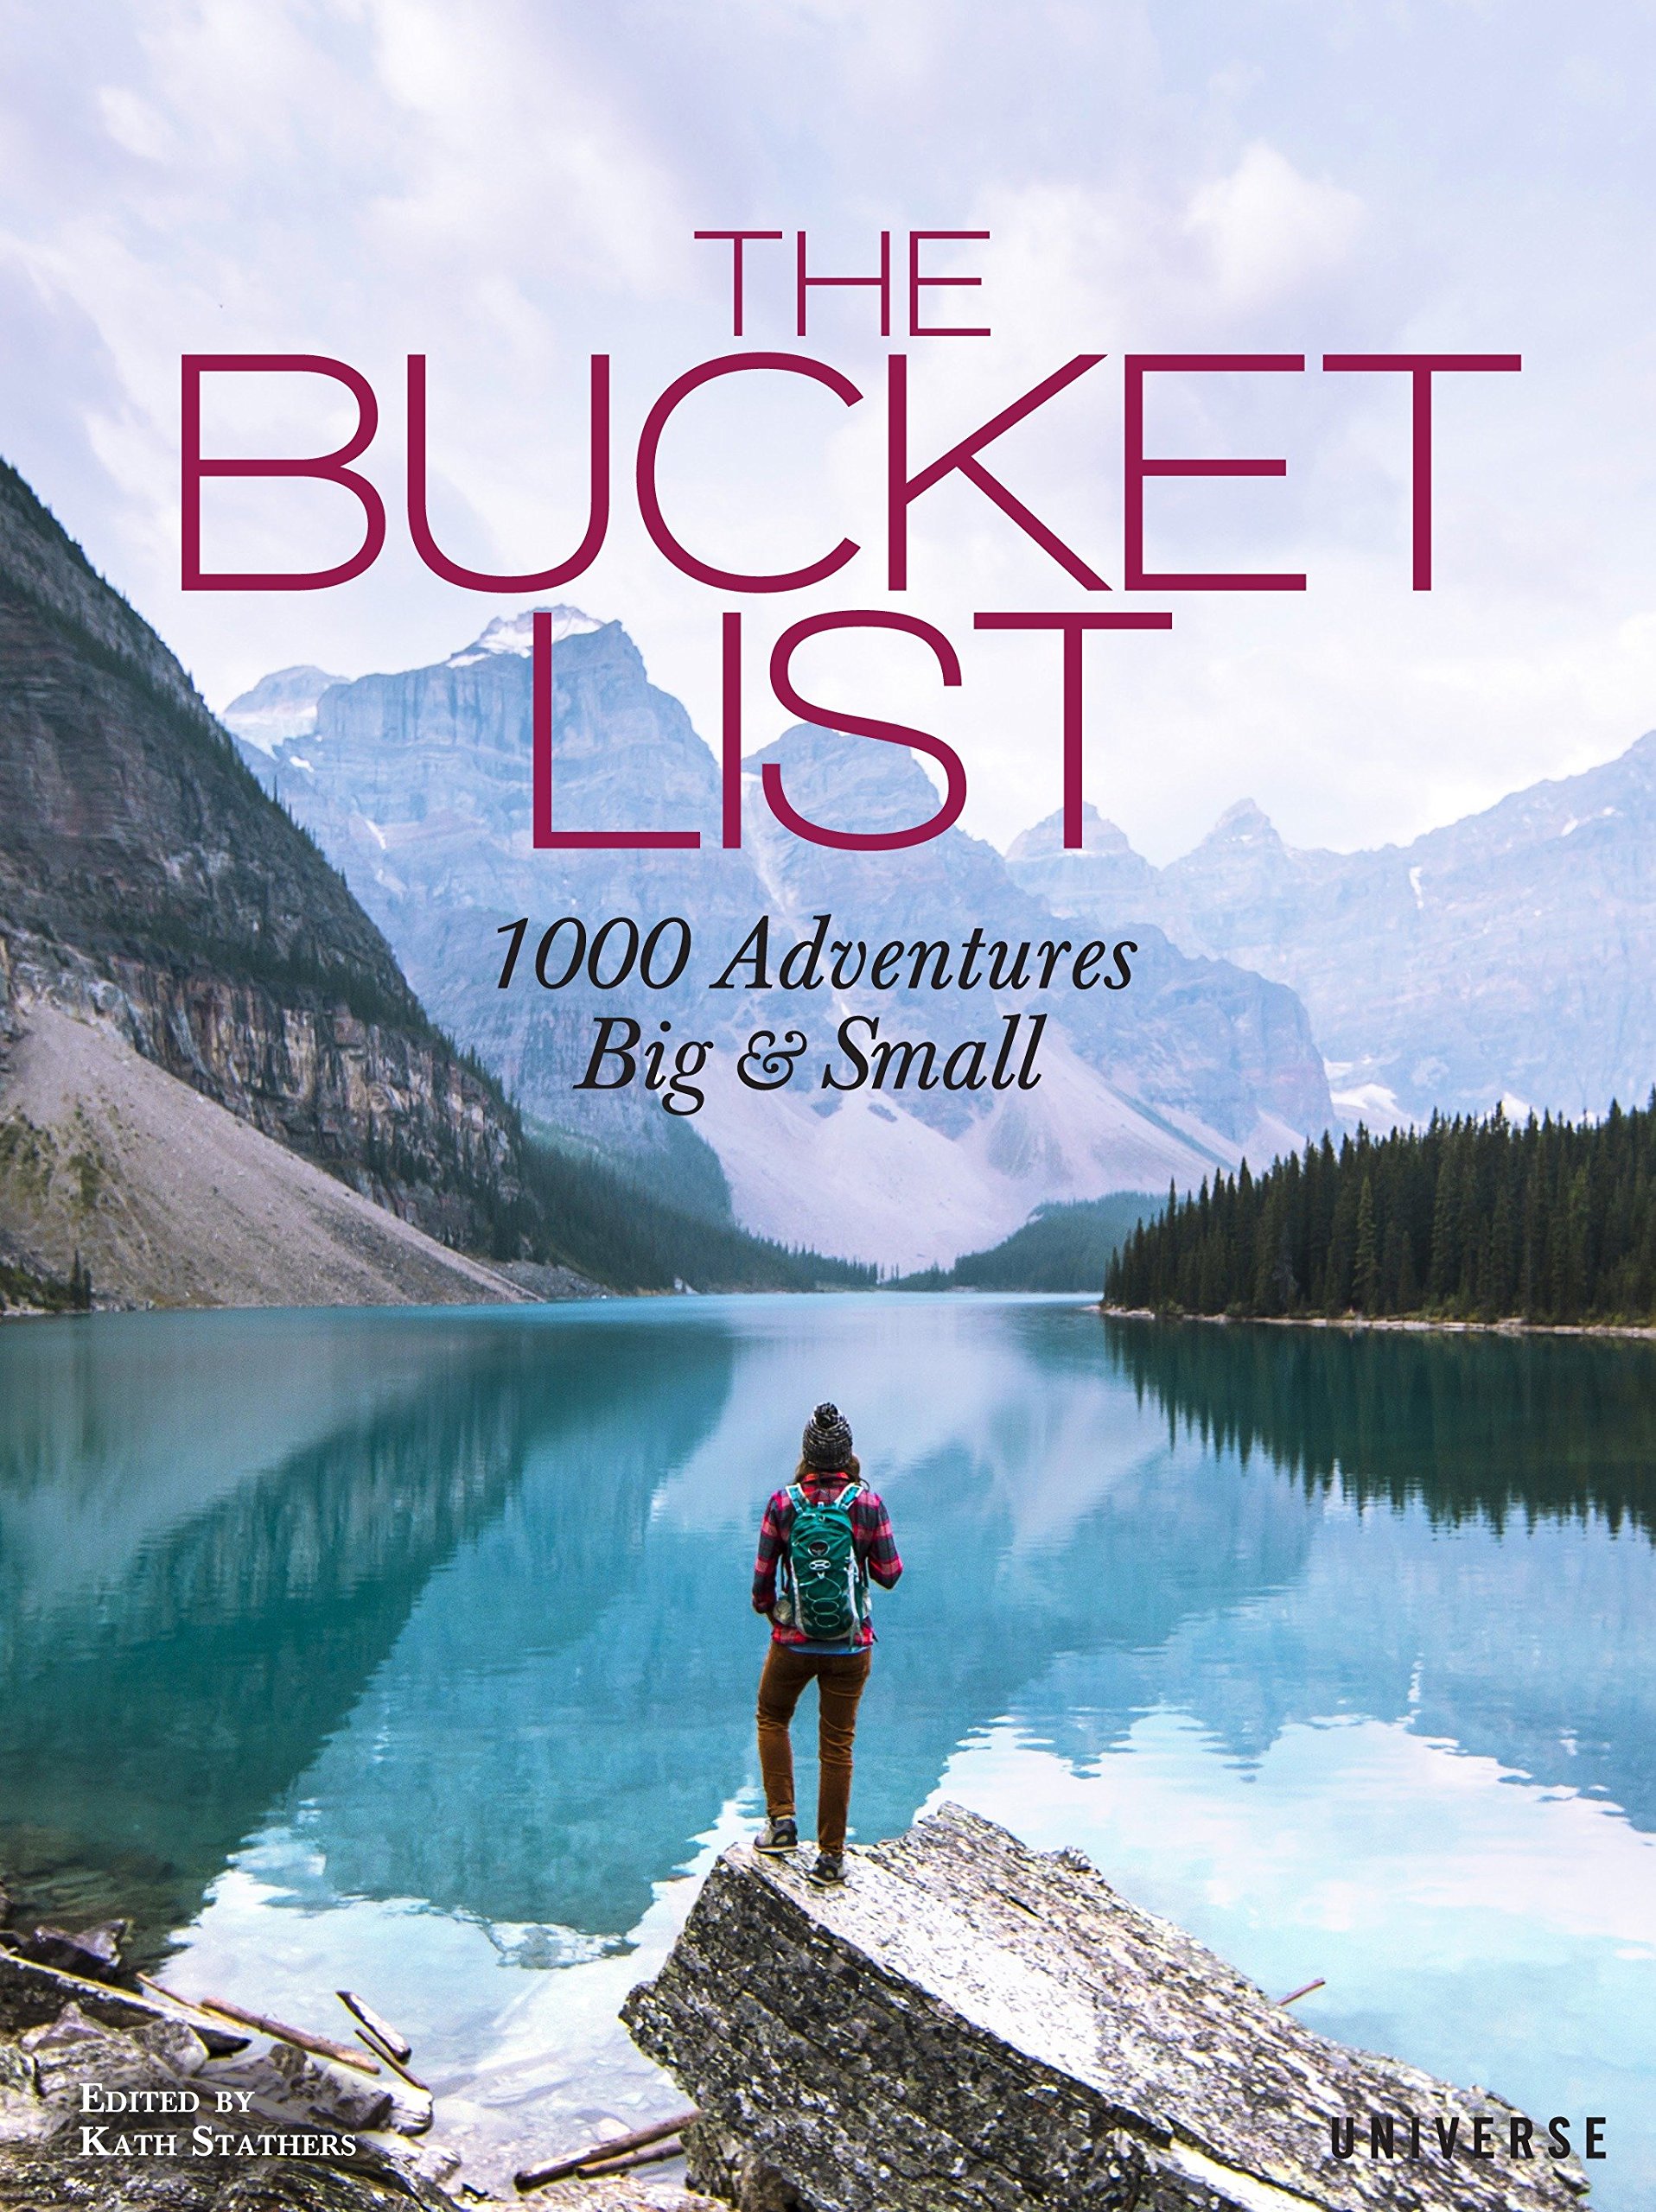 21 Best Travel Books to Ignite Your Wanderlust